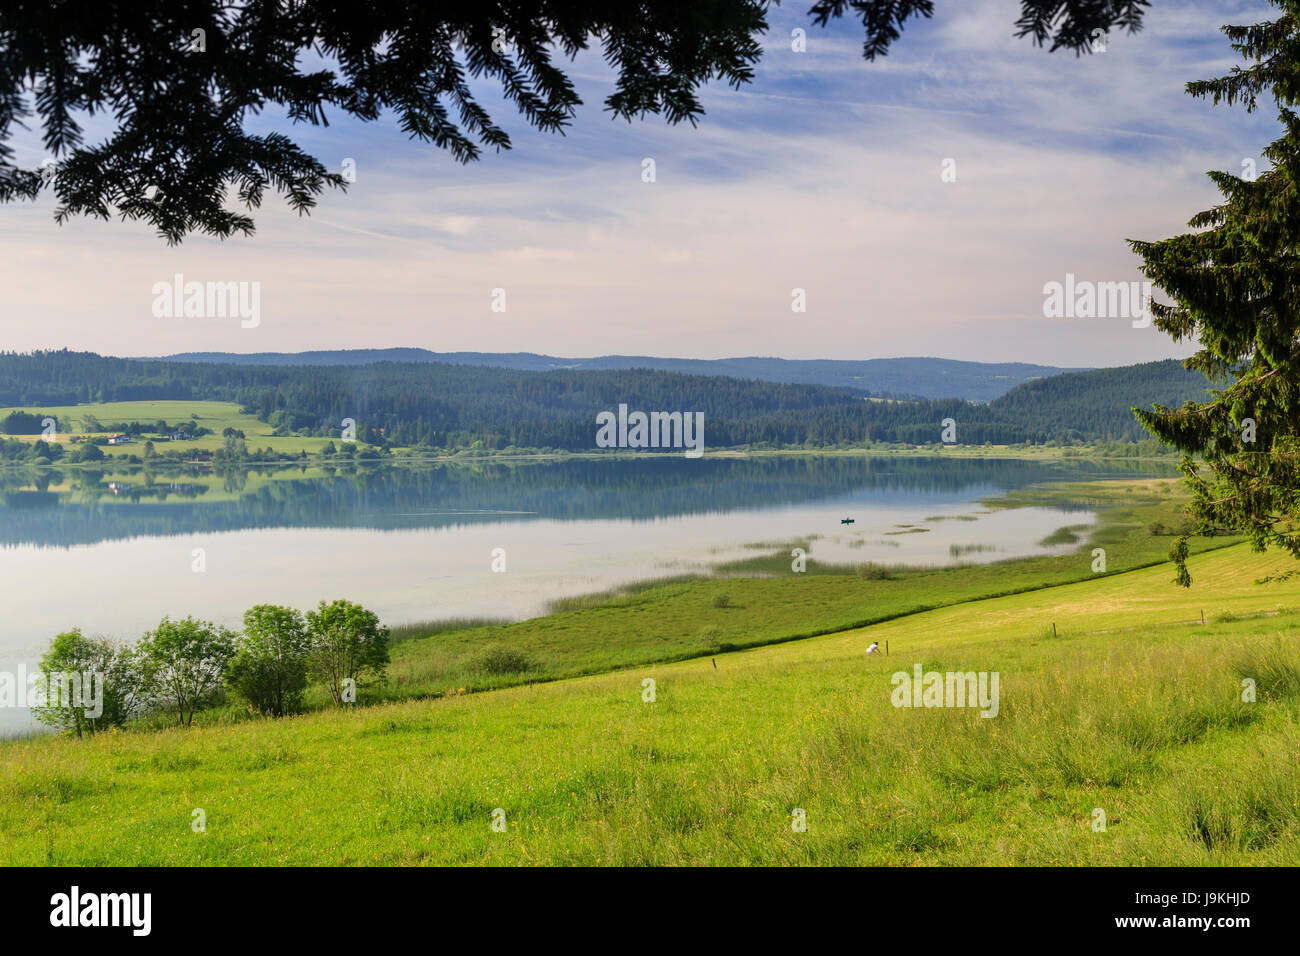 France, Doubs, Jura Mountains, Labergement Sainte Marie, Remoray lake in spring Stock Photo